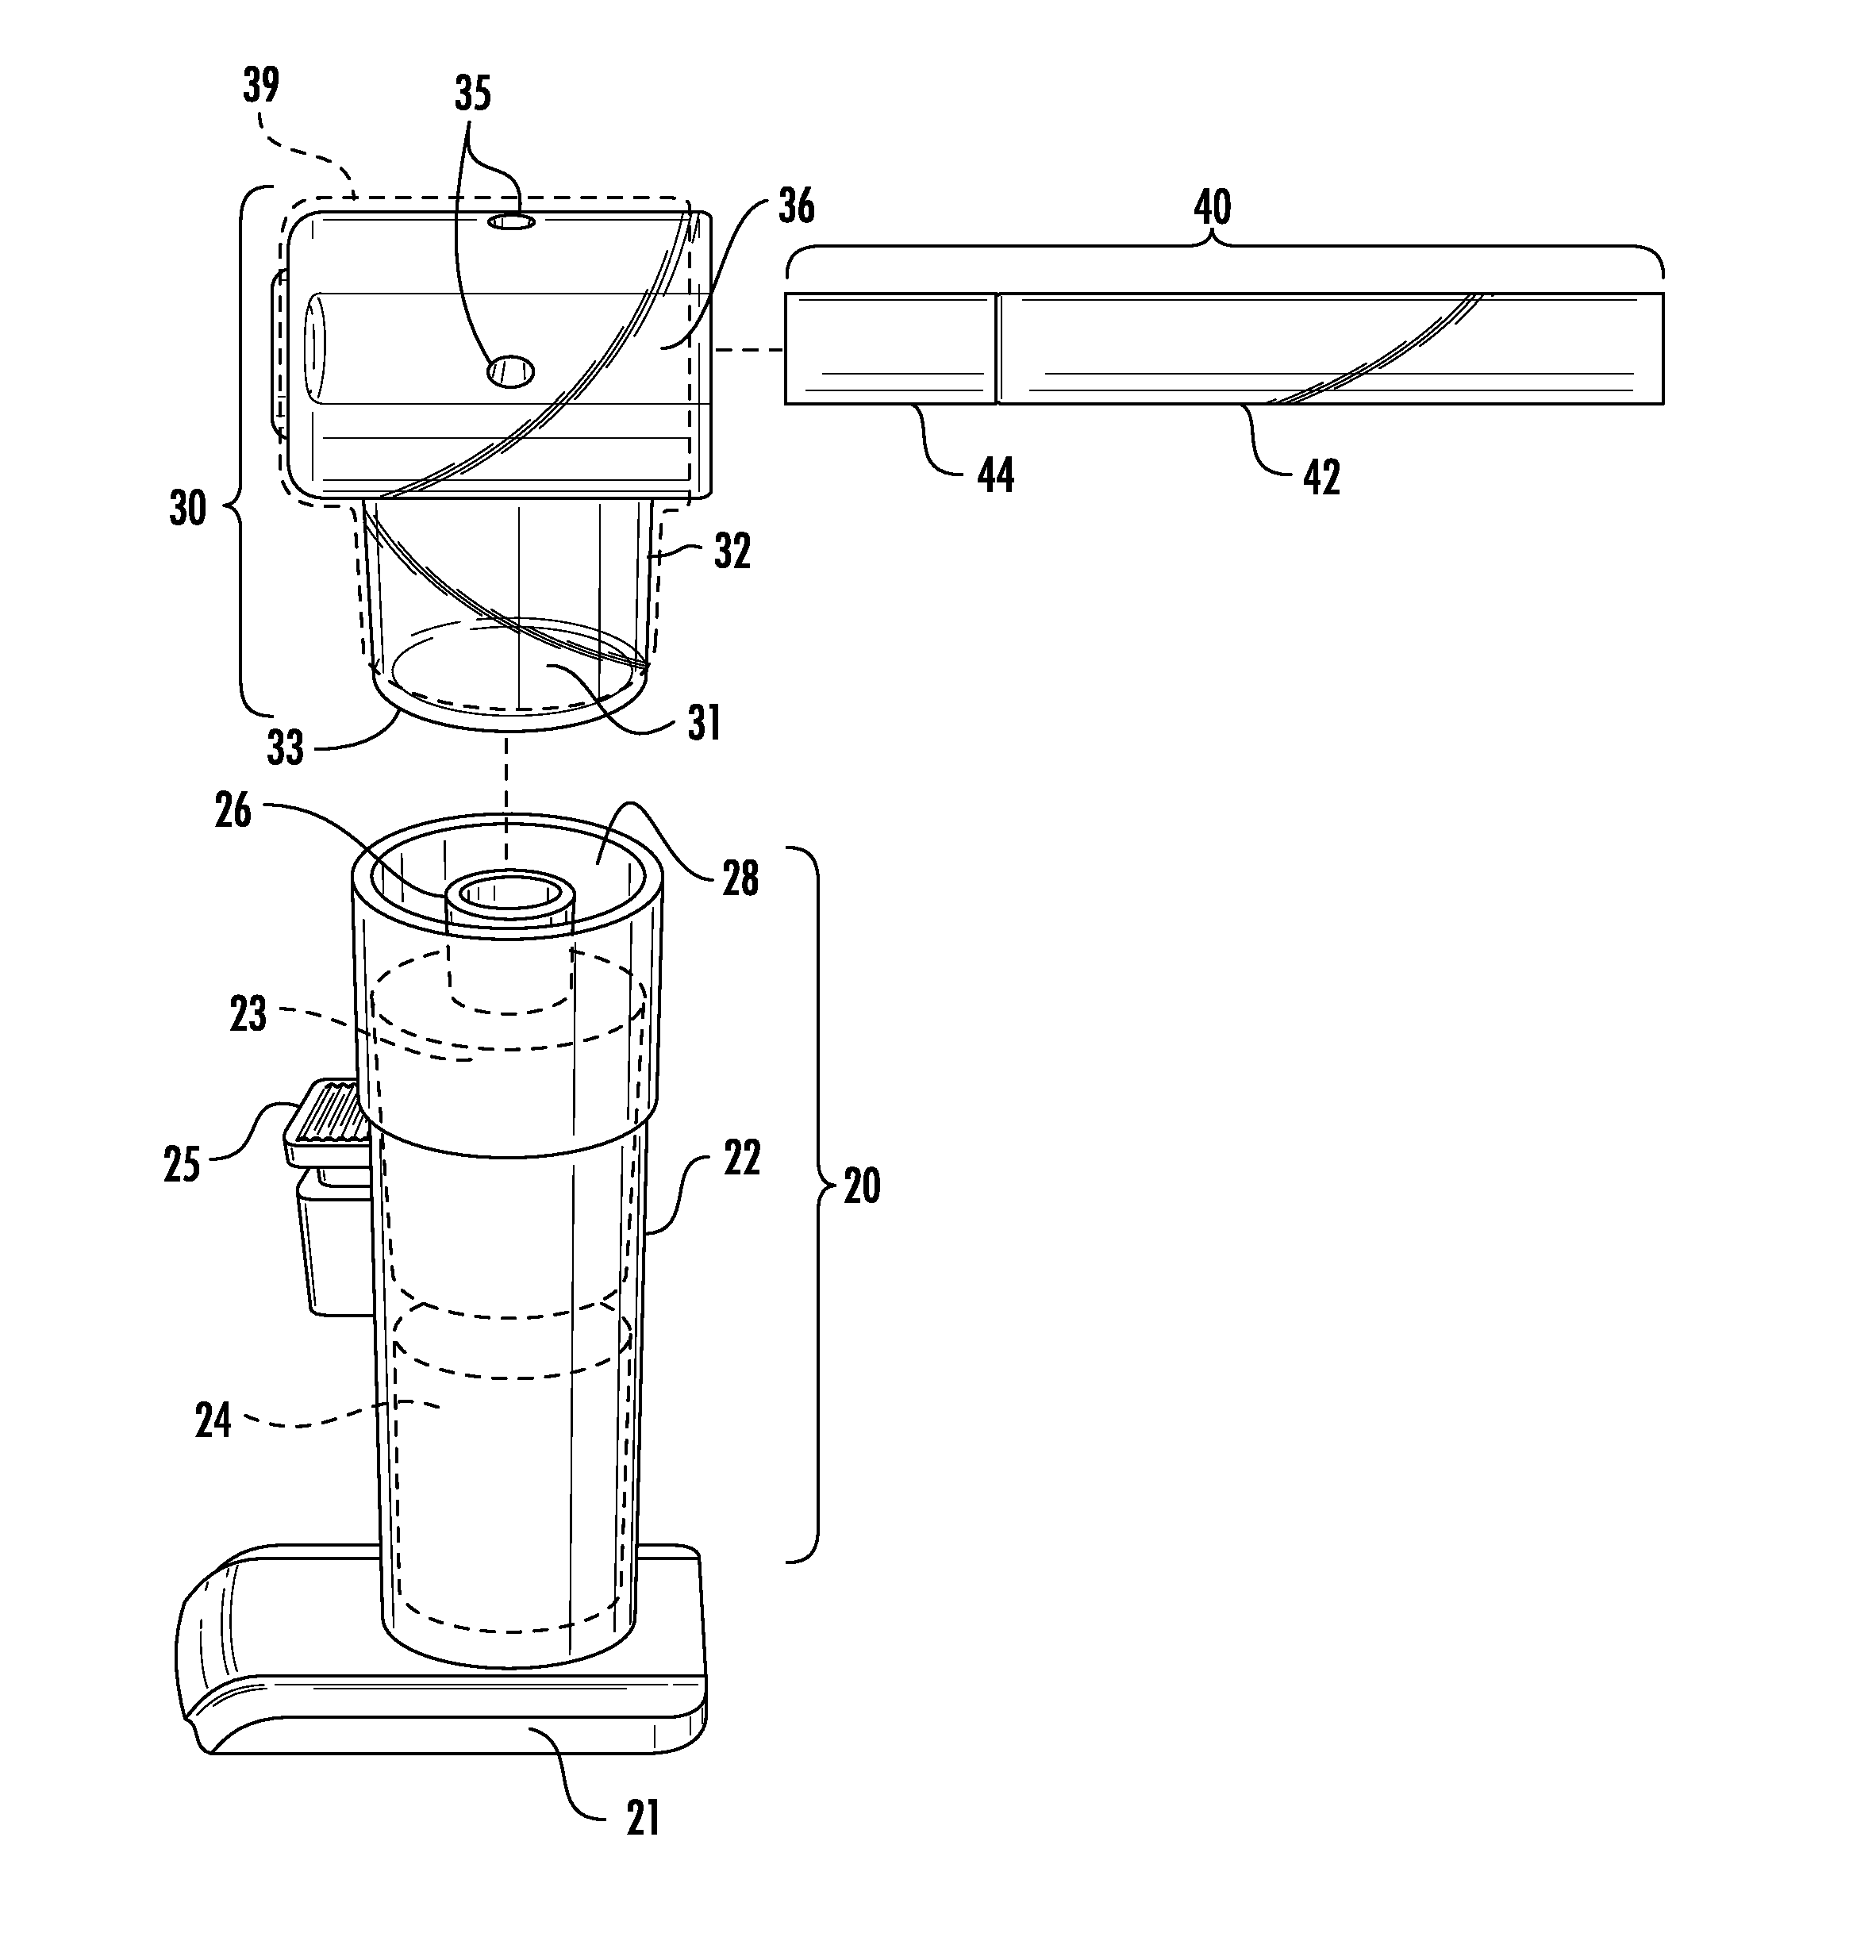 Substrates for vaporizing and delivering an aerosol agent